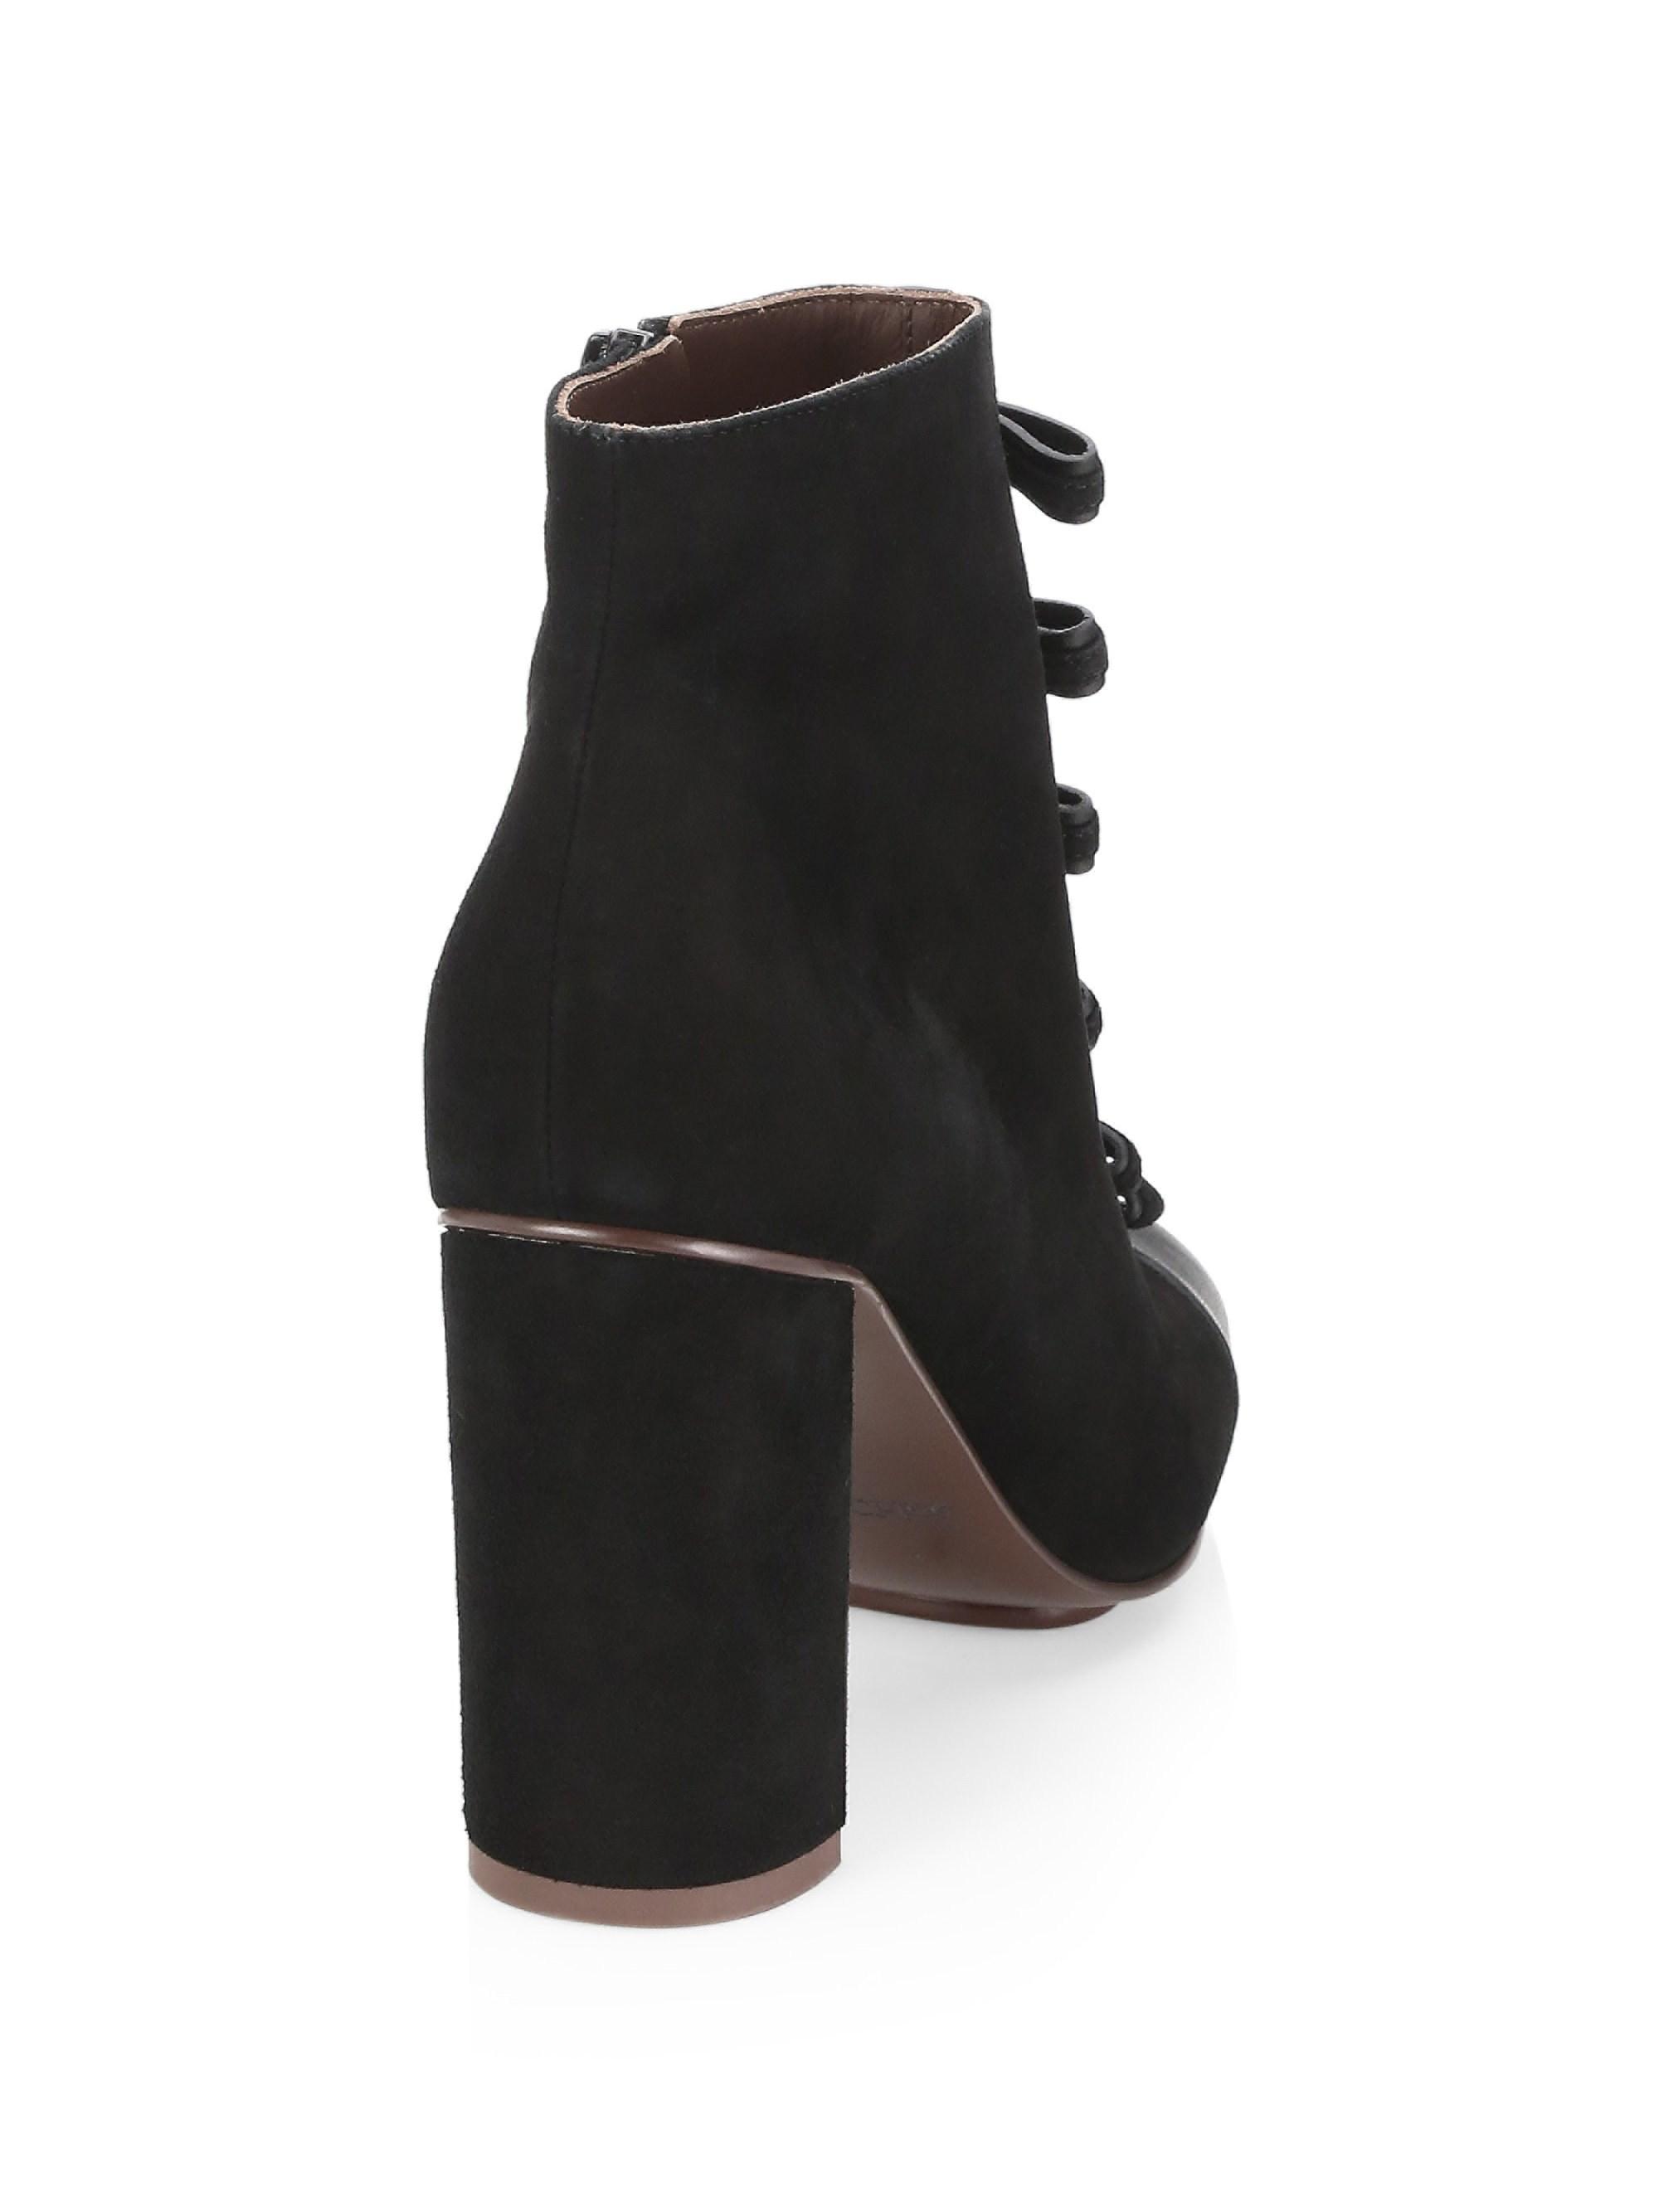 Suede Women's Gisel Bow Booties - Black 